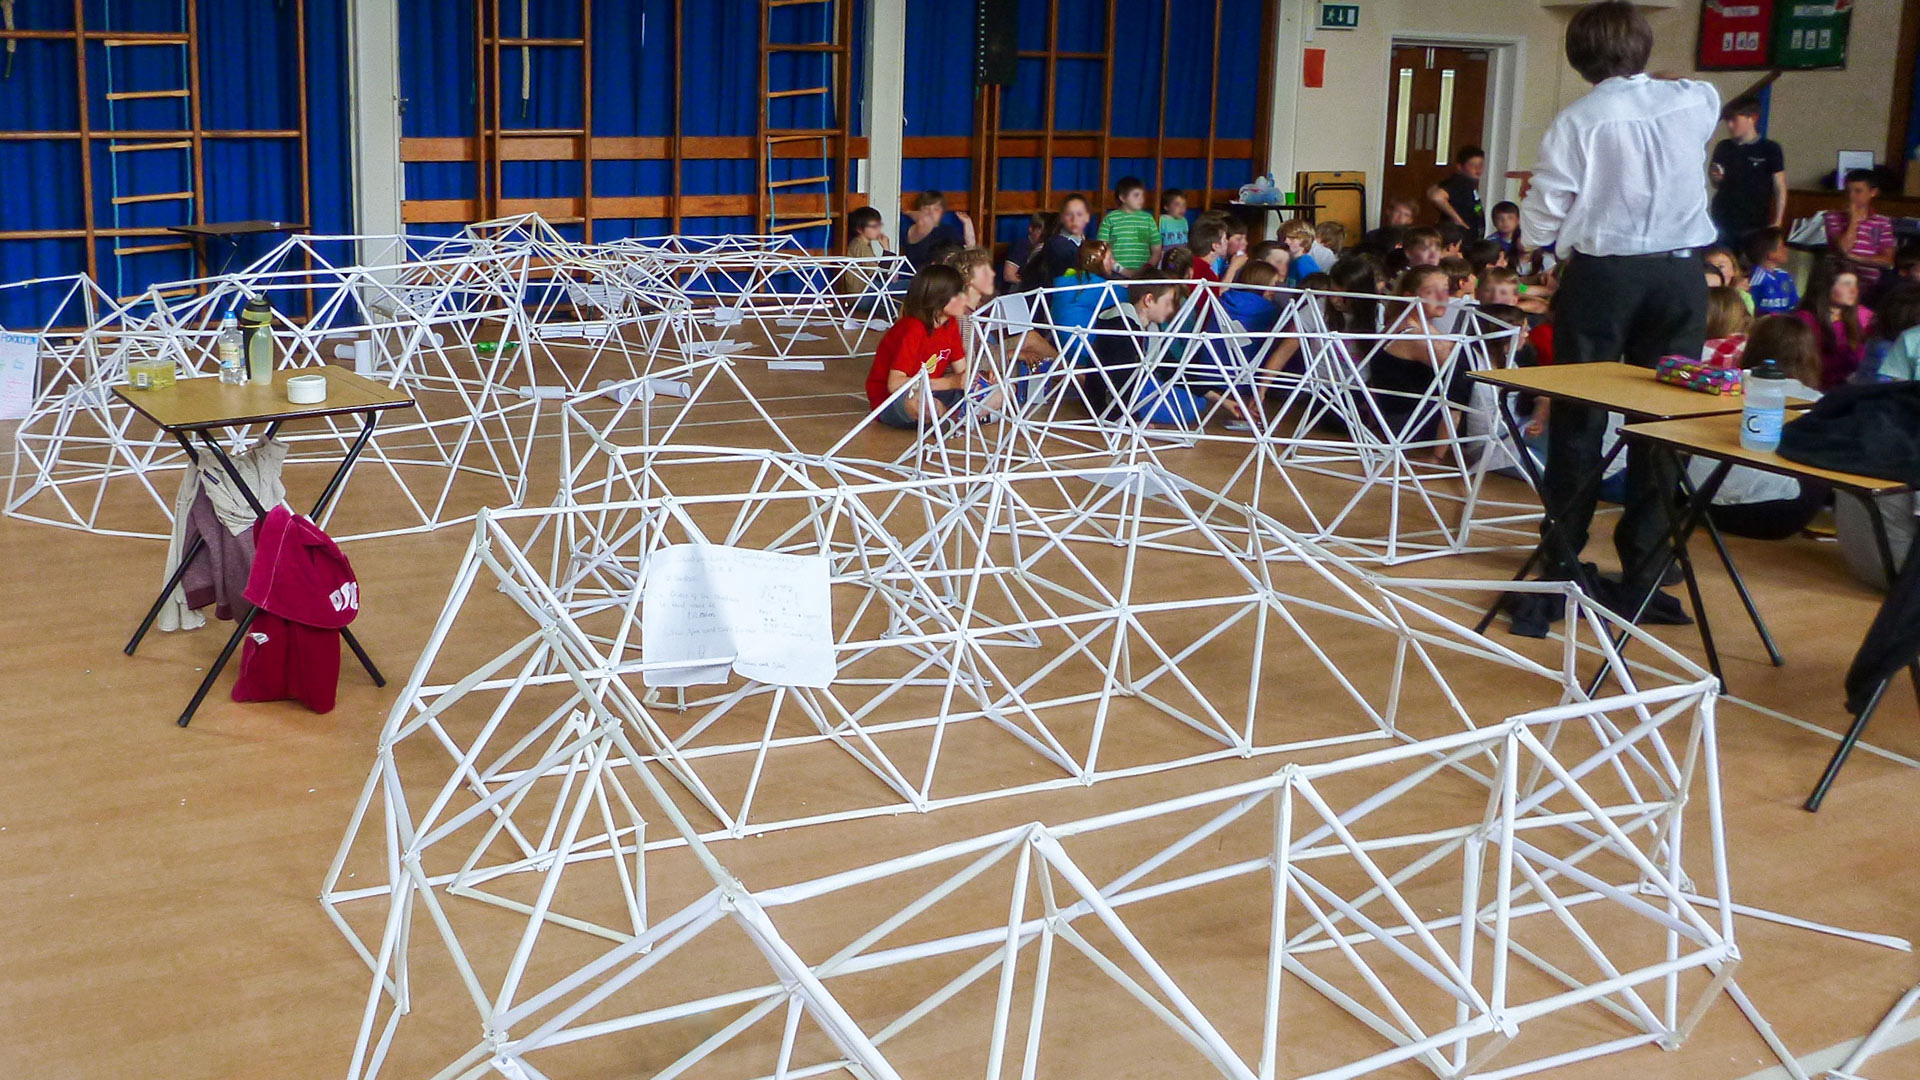 school hall with children learning different architectural designs made out of cardboard tubes